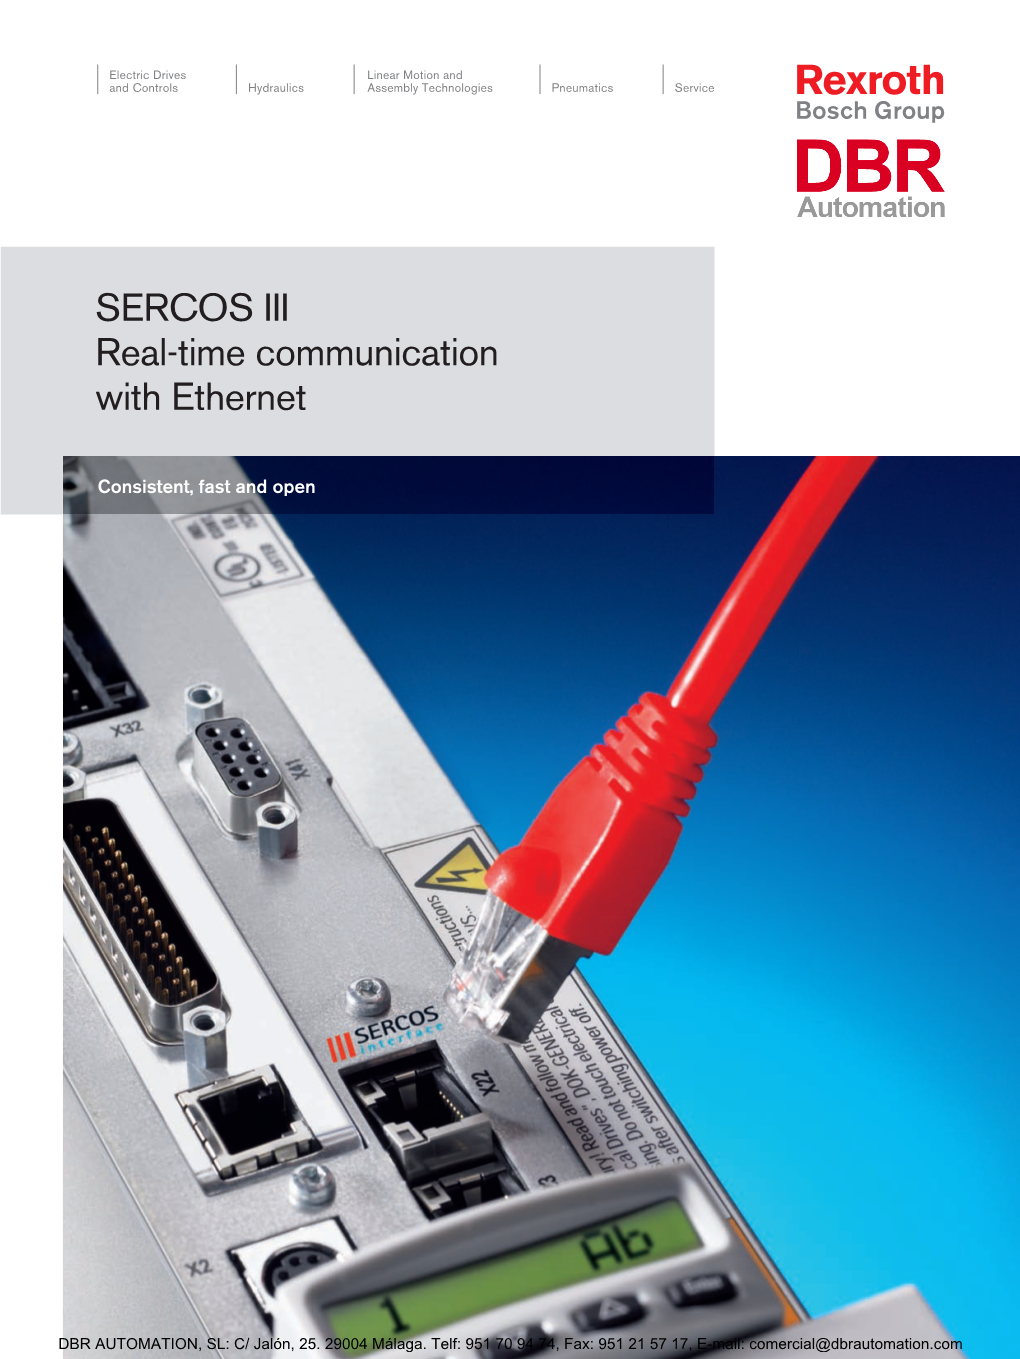 SERCOS III Real-Time Communication with Ethernet